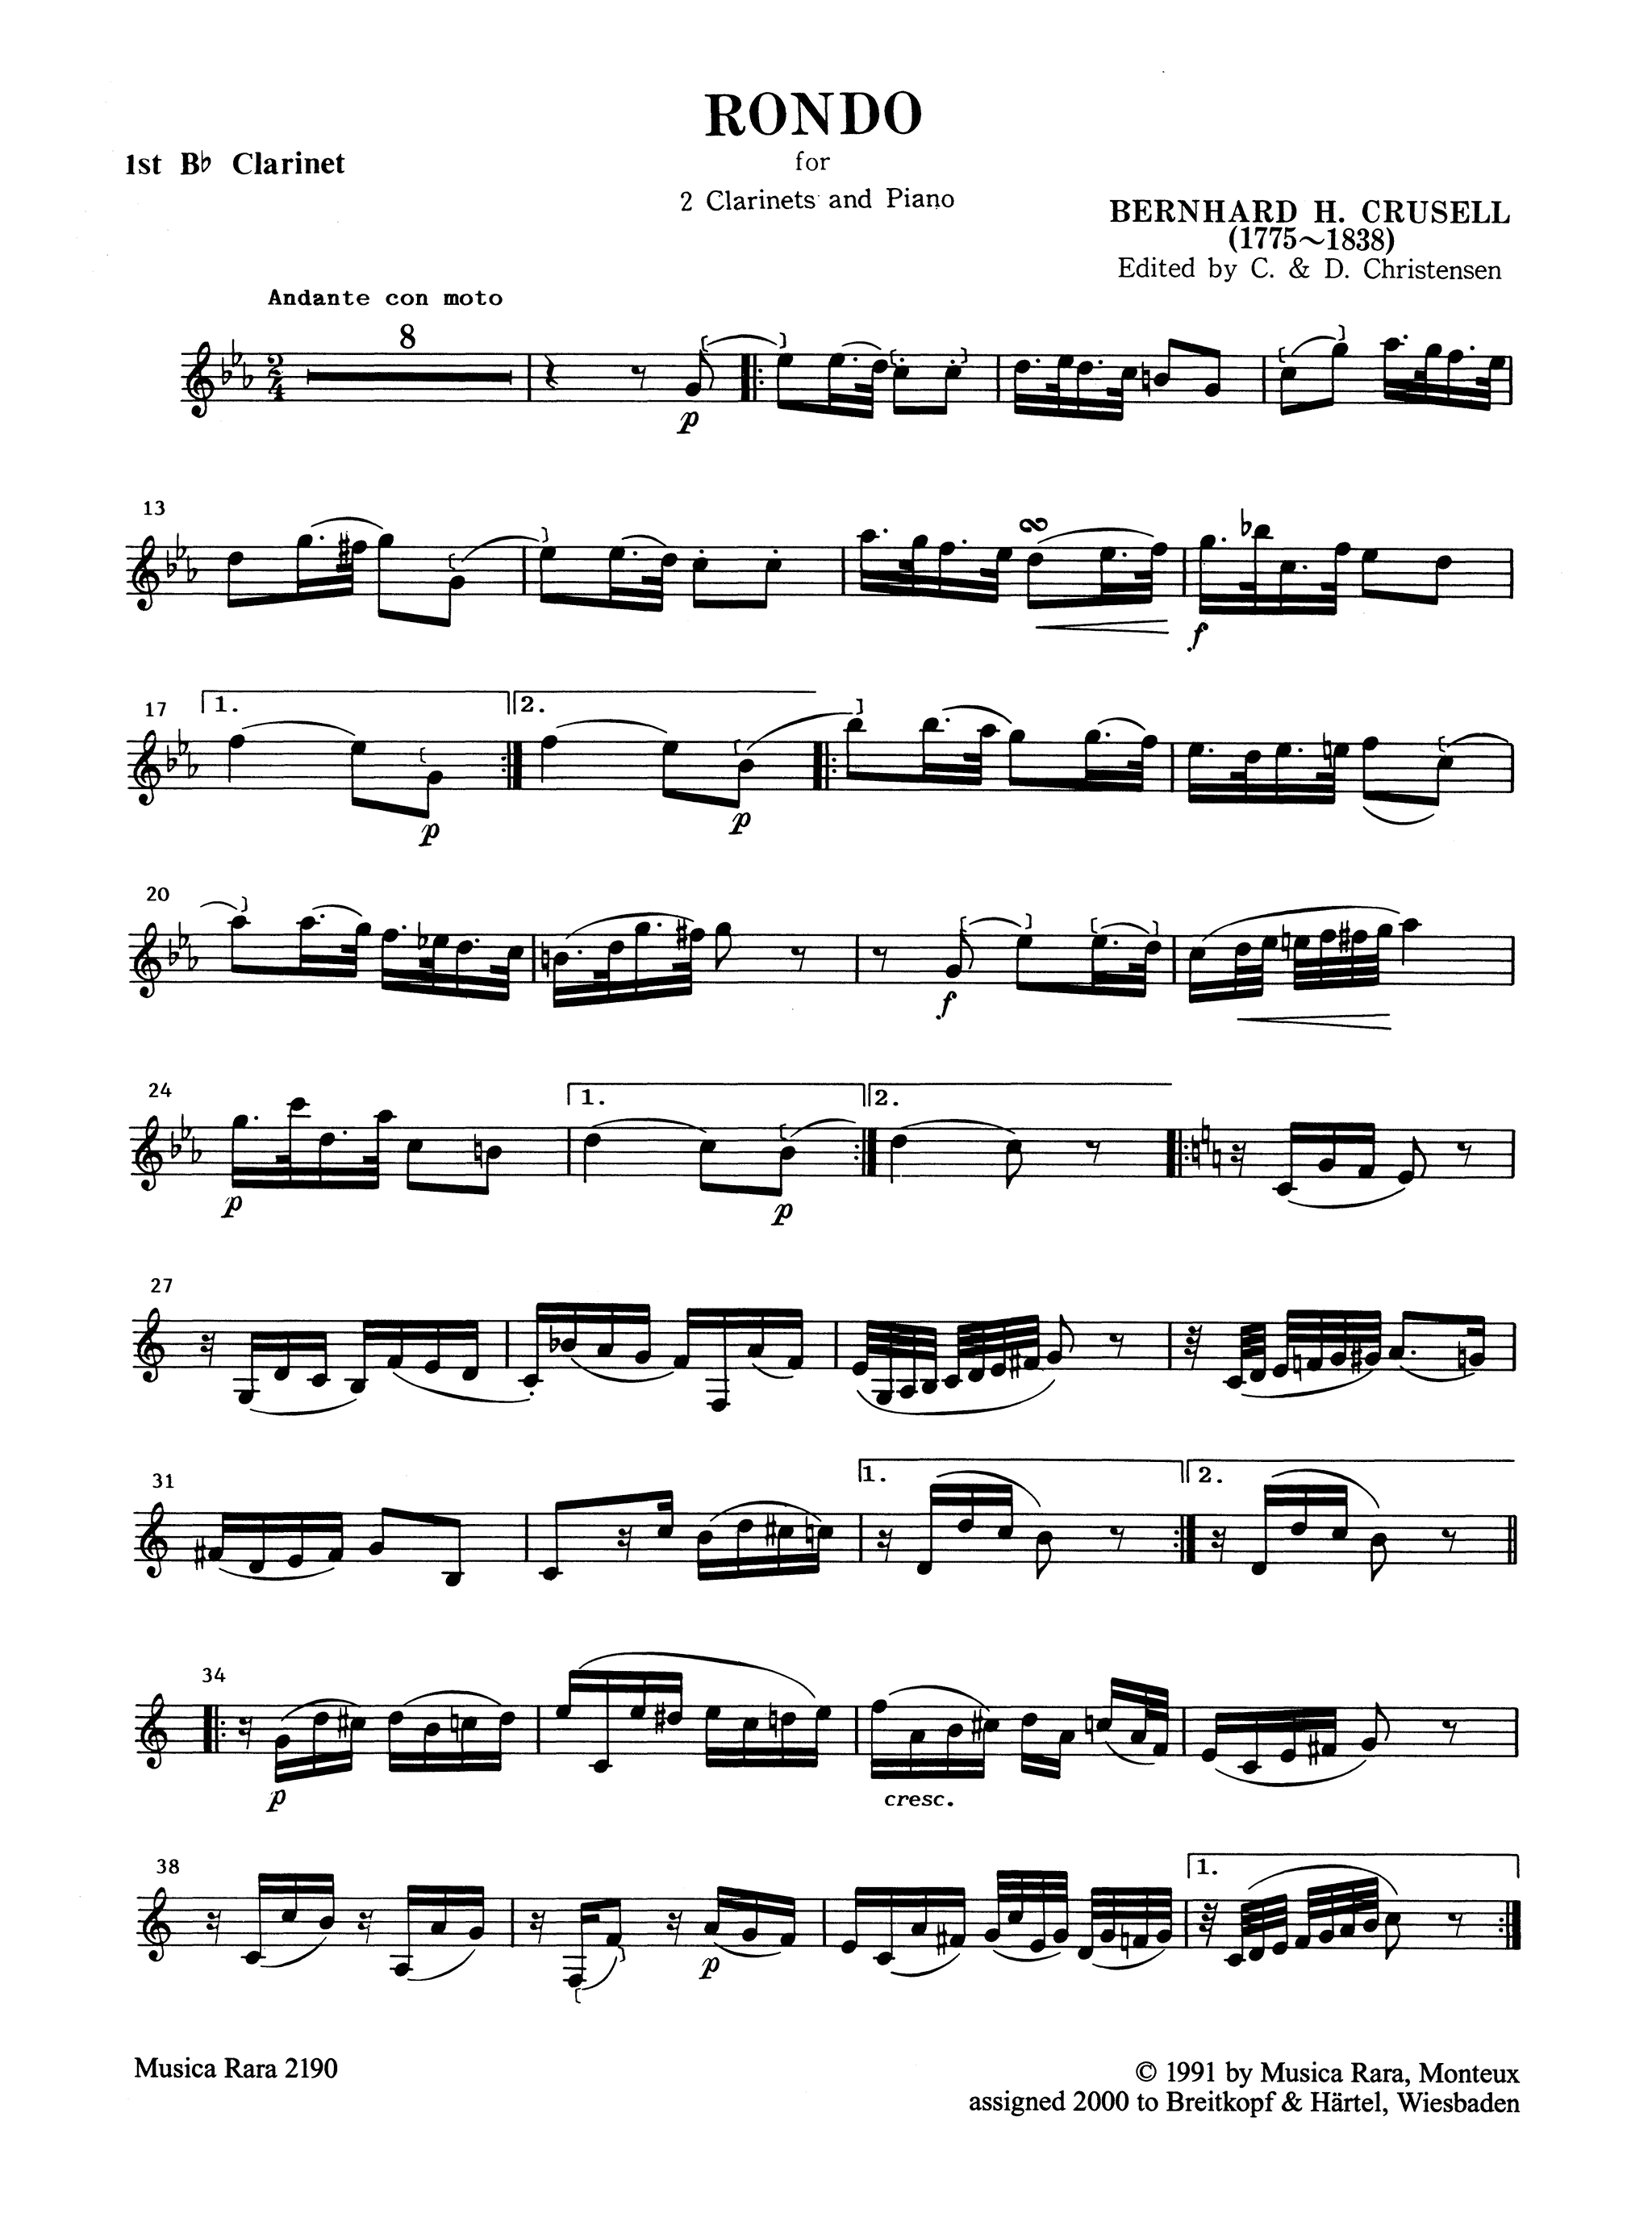 Crusell Rondo for 2 Clarinets & Piano first solo part